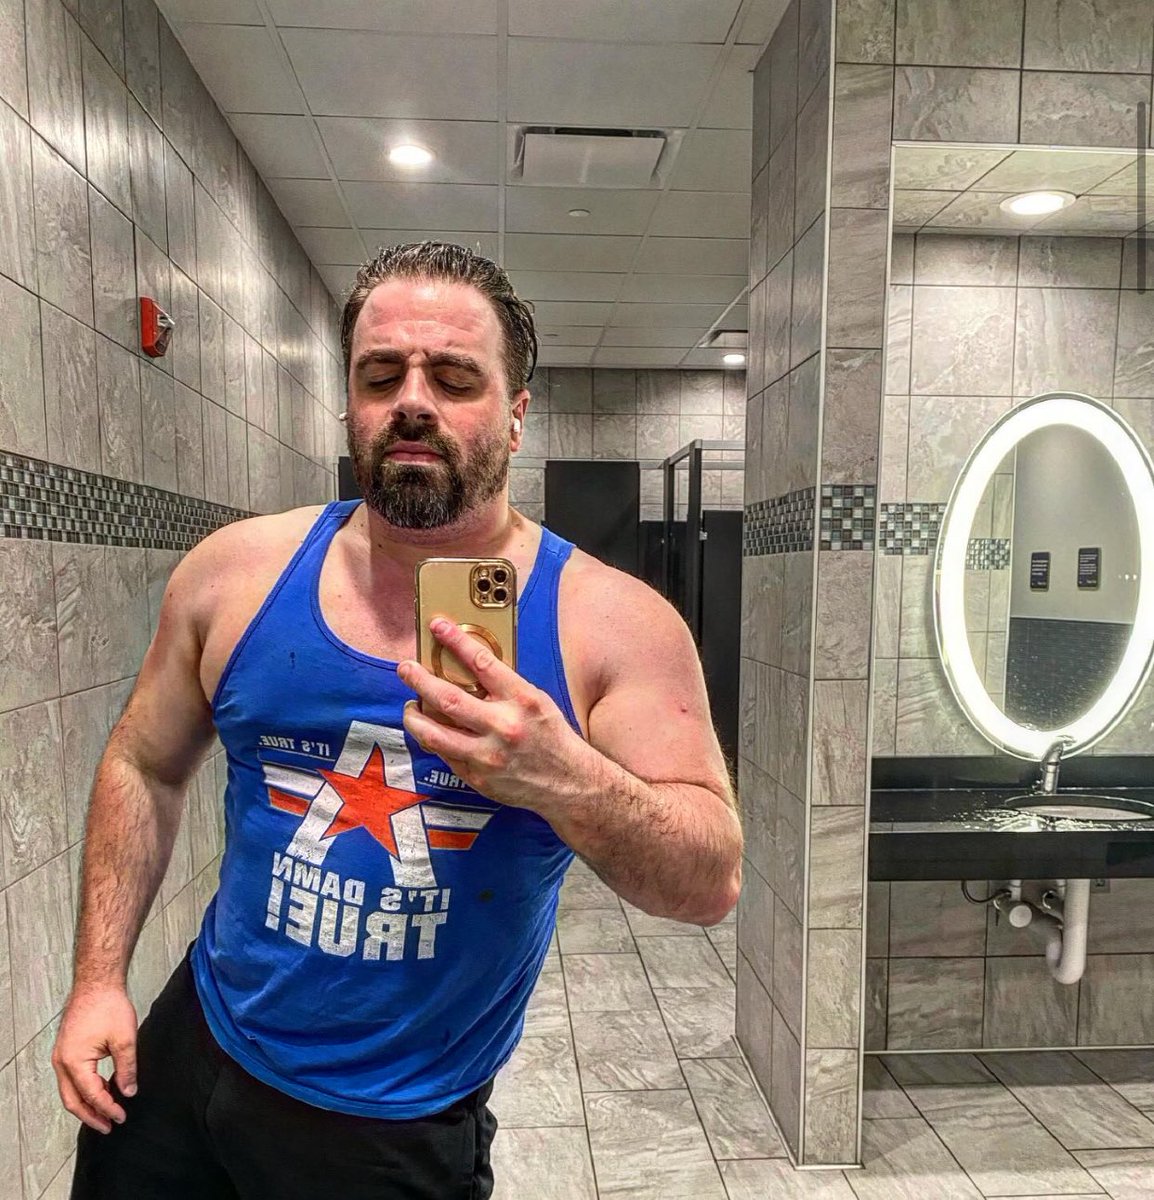 Chest day!

#gym #fitness #workout #running #motivation #bodybuilding #fitnessmotivation #gymlife #findom #model #modeling #health #feet #intermittentfasting #paypiggies #healthy #photography #crossfit #fitnessmodel #exercise #spinning #alpha #keto #weightlifting #weightloss